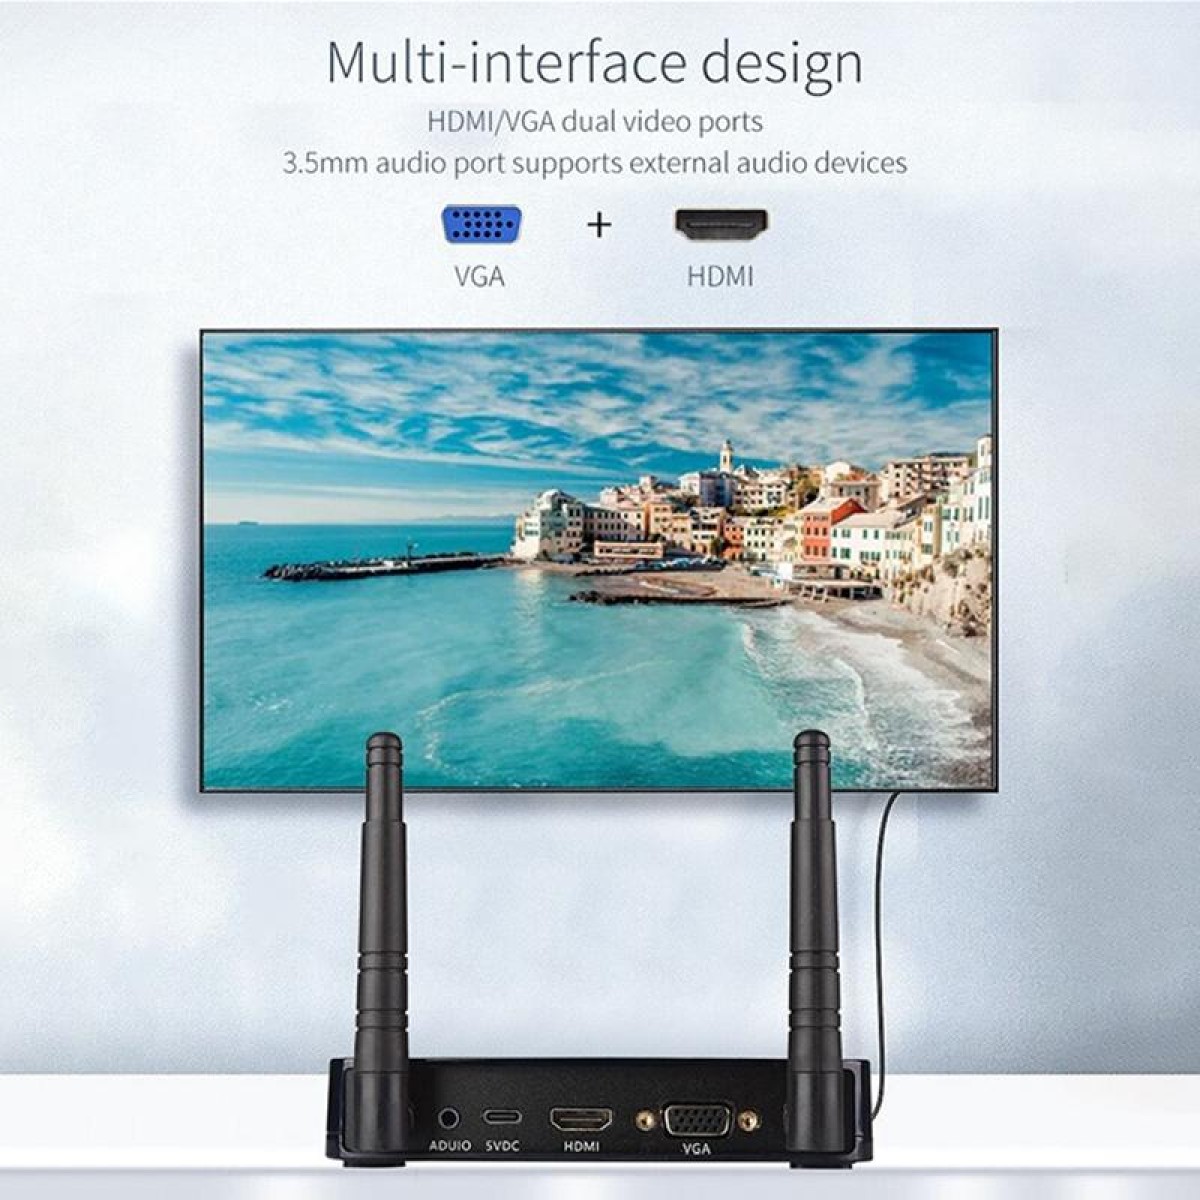 Measy UHD200 Wireless HDMI Transmitter and Receiver, Transmission Distance: 100m